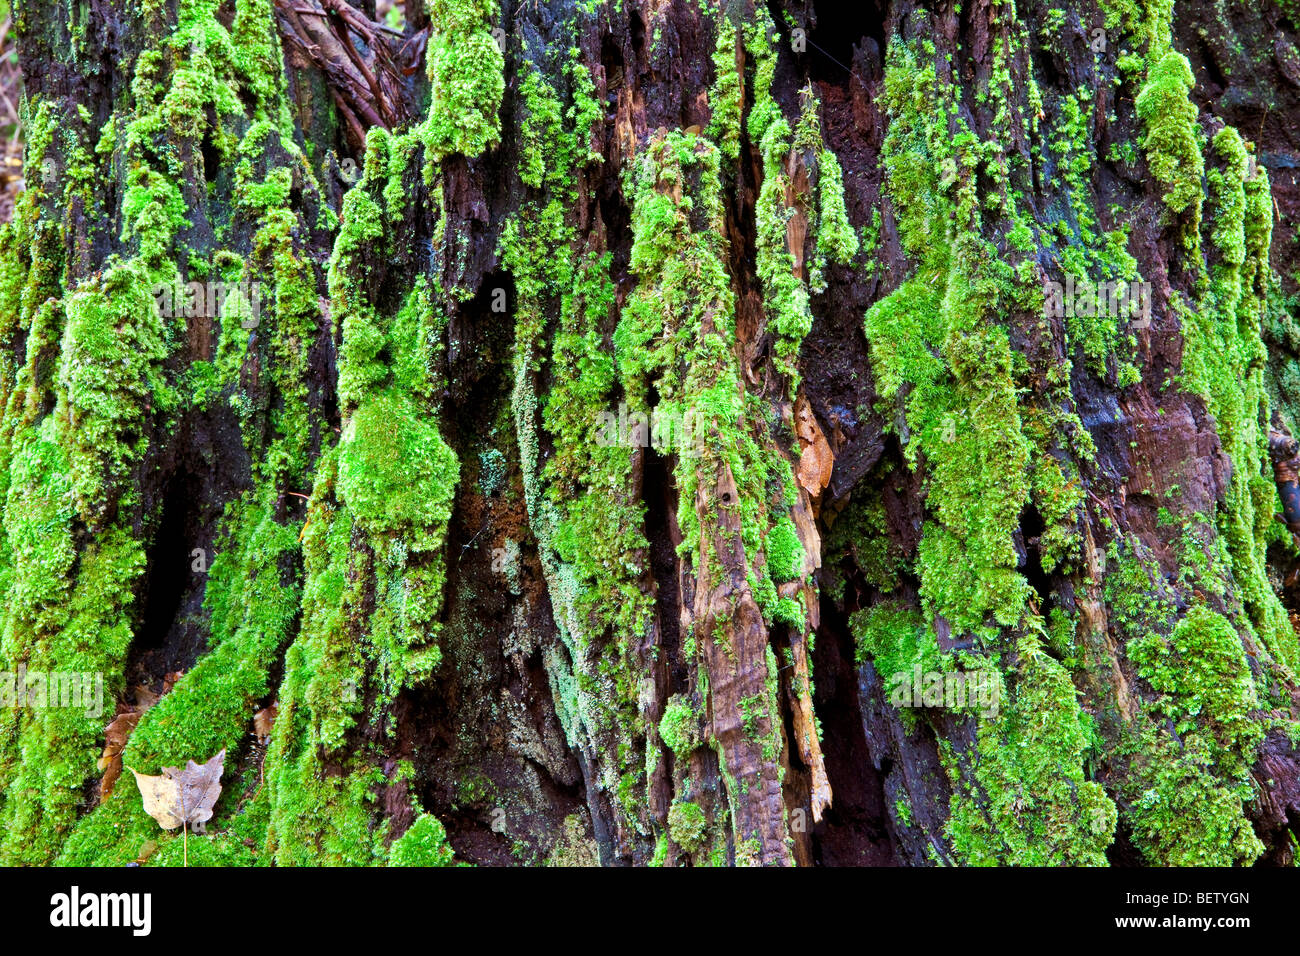 Moss on Tree Stump, Great Smoky Mountains National Park, Tennessee Stock Photo